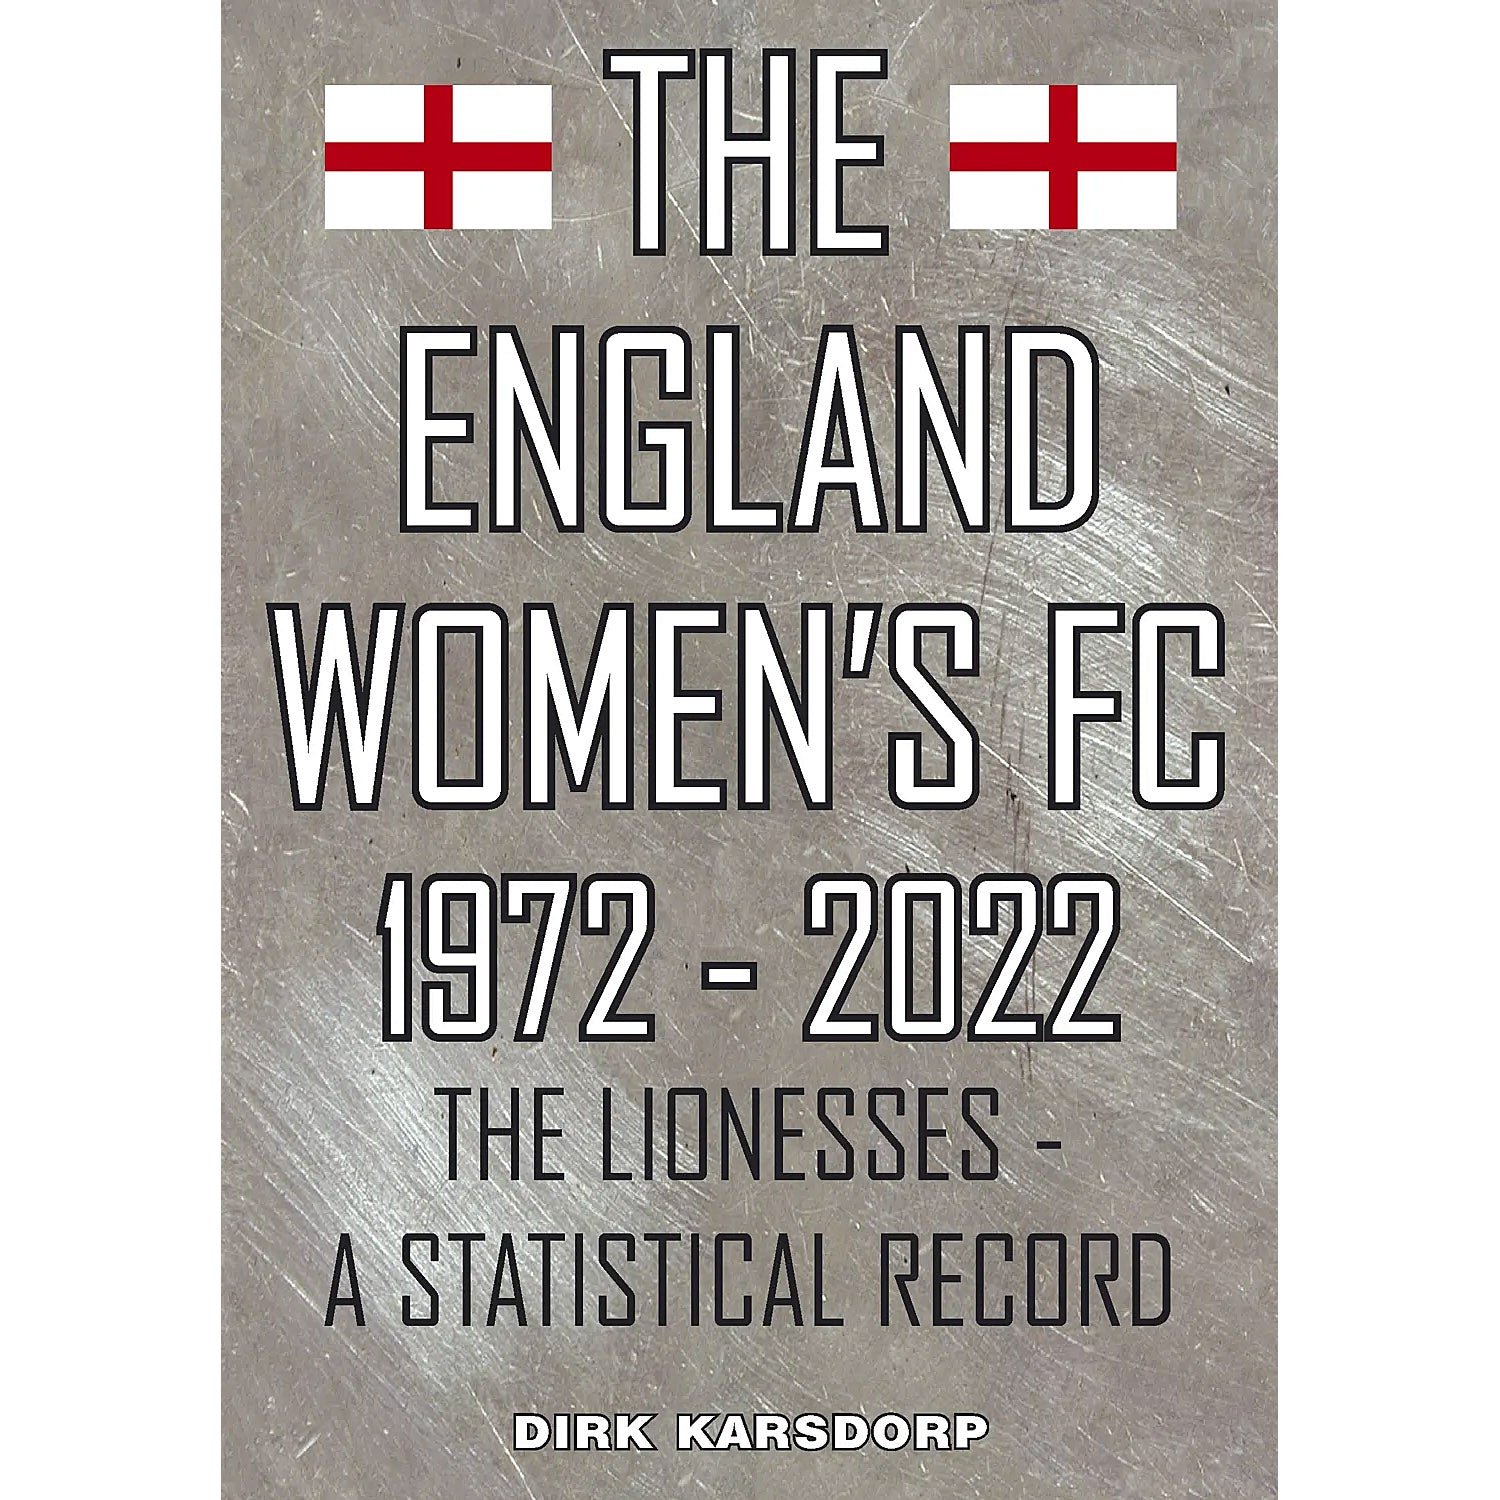 The England Women's FC 1972-2022 – The Lionesses – A Statistical Record